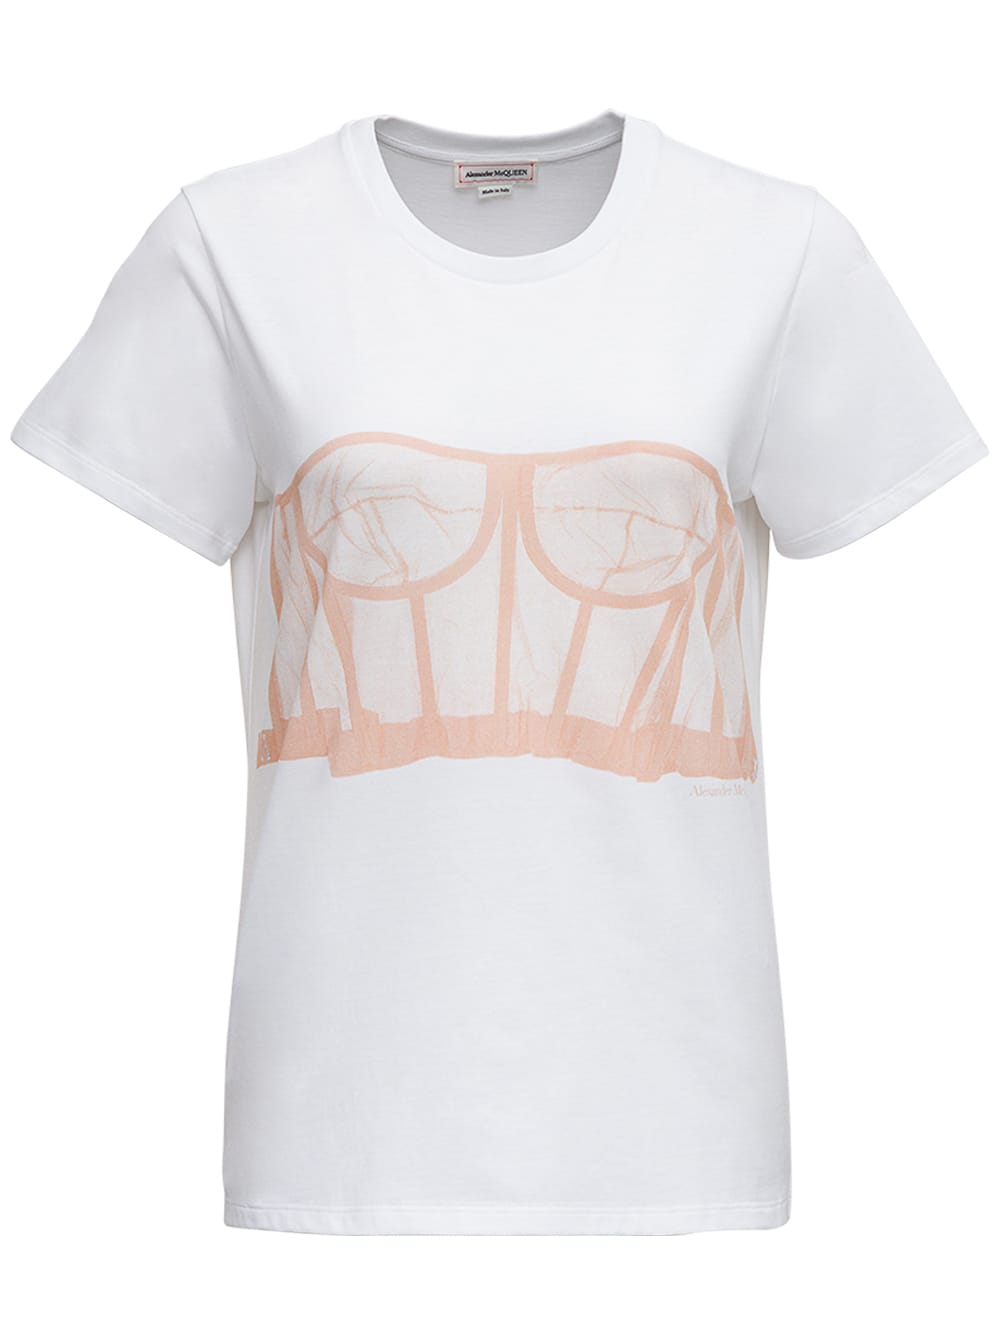 Alexander McQueen T-shirt In White And Pink Cotton With Corset Print